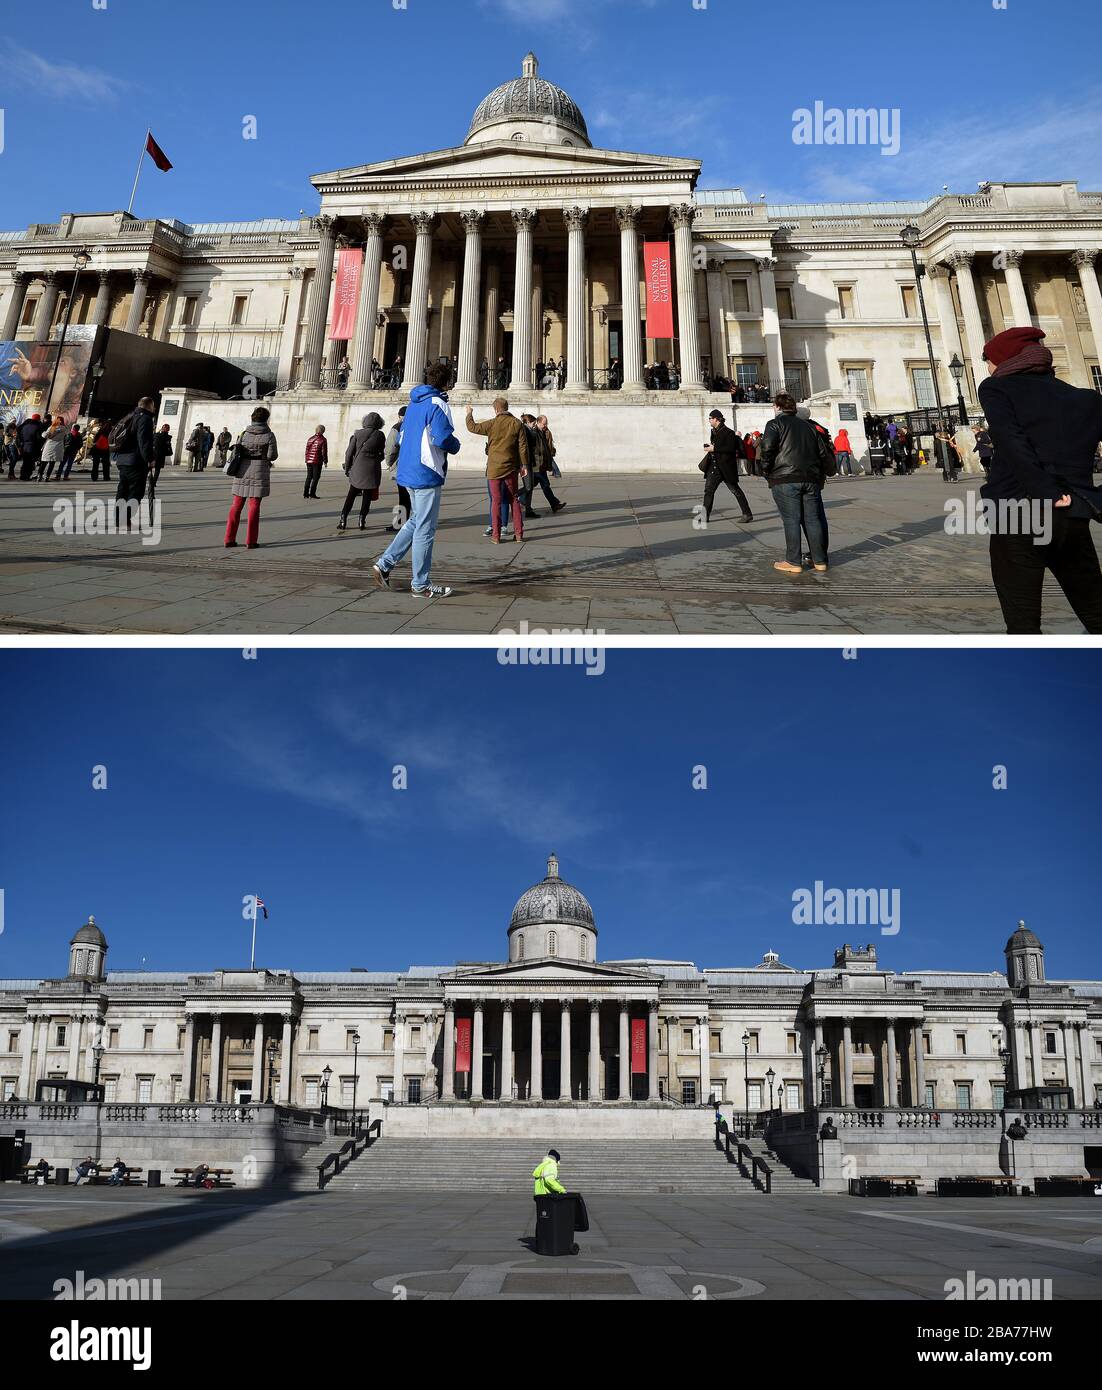 Composite photos of London's National Gallery in Trafalgar Square on 28/01/14 (top), and on Tuesday 24/03/20 (bottom), the day after Prime Minister Boris Johnson put the UK in lockdown to help curb the spread of the coronavirus. Stock Photo